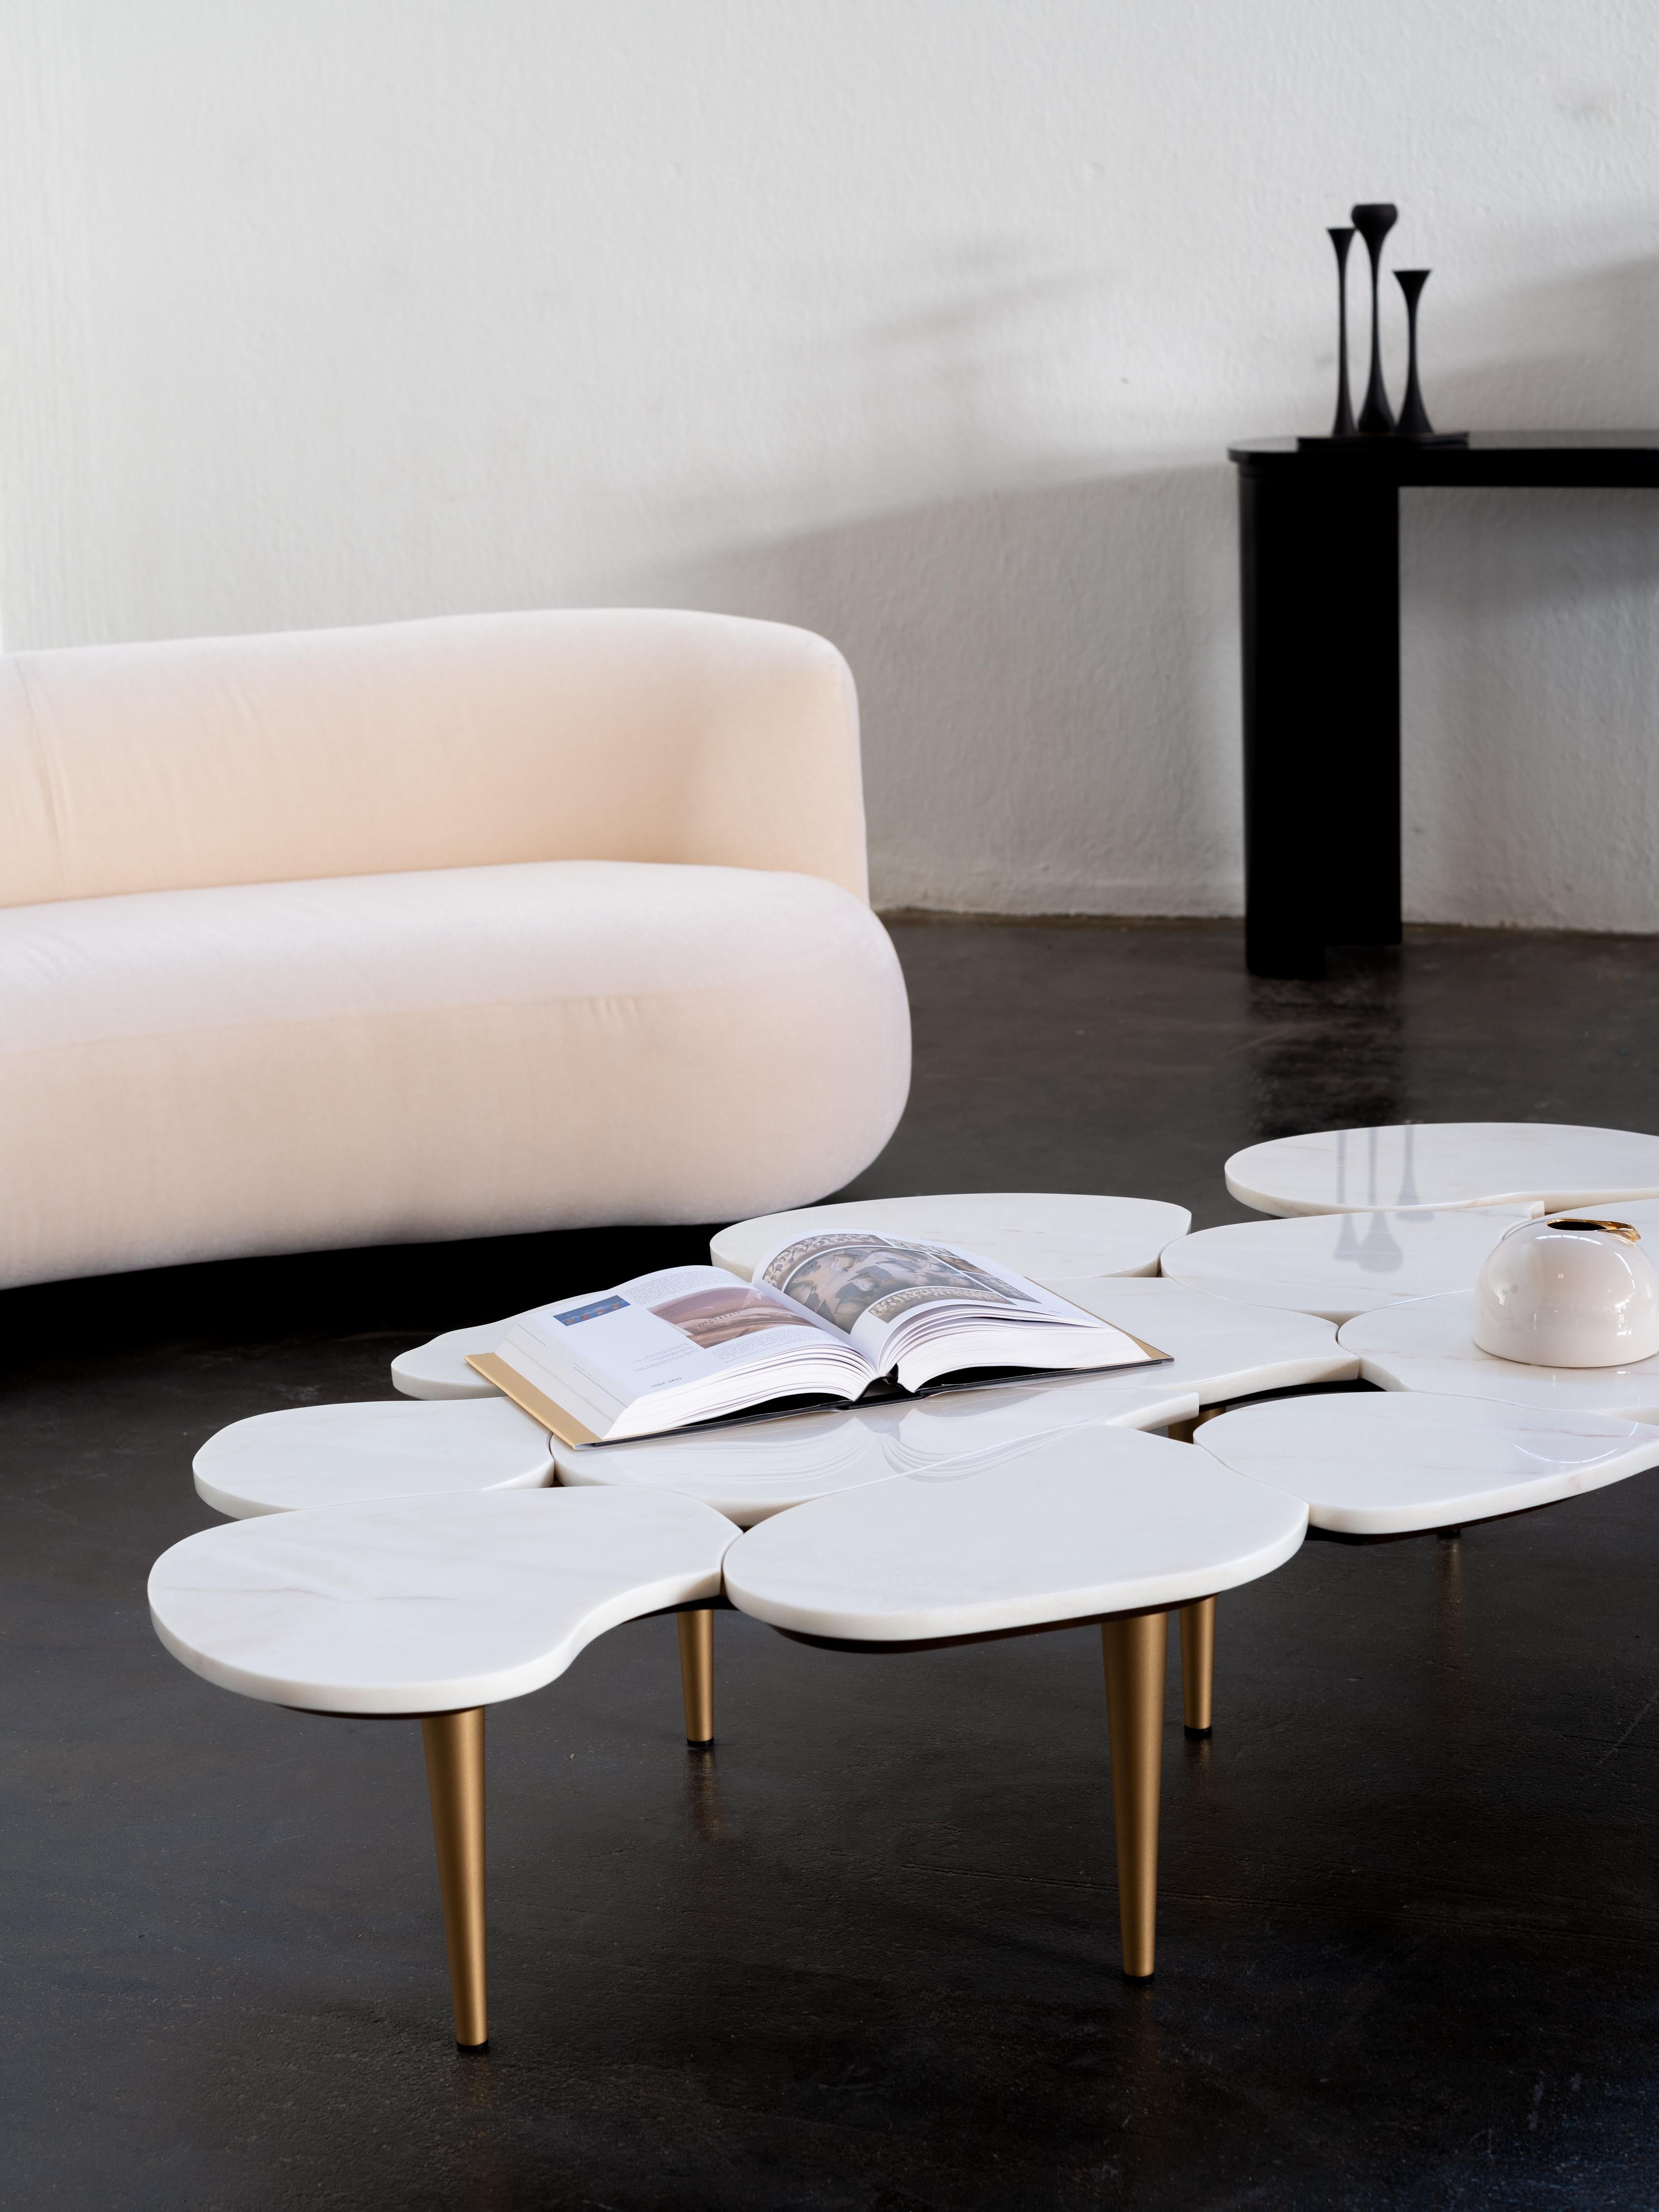 Infinity Coffee Table, Modern Collection, Handcrafted in Portugal - Europe by Greenapple.

The Infinity marble coffee table captures the passage of time in an infinite gaze. Featuring a petal-shaped top in Calacatta marble, Infinity unveils a